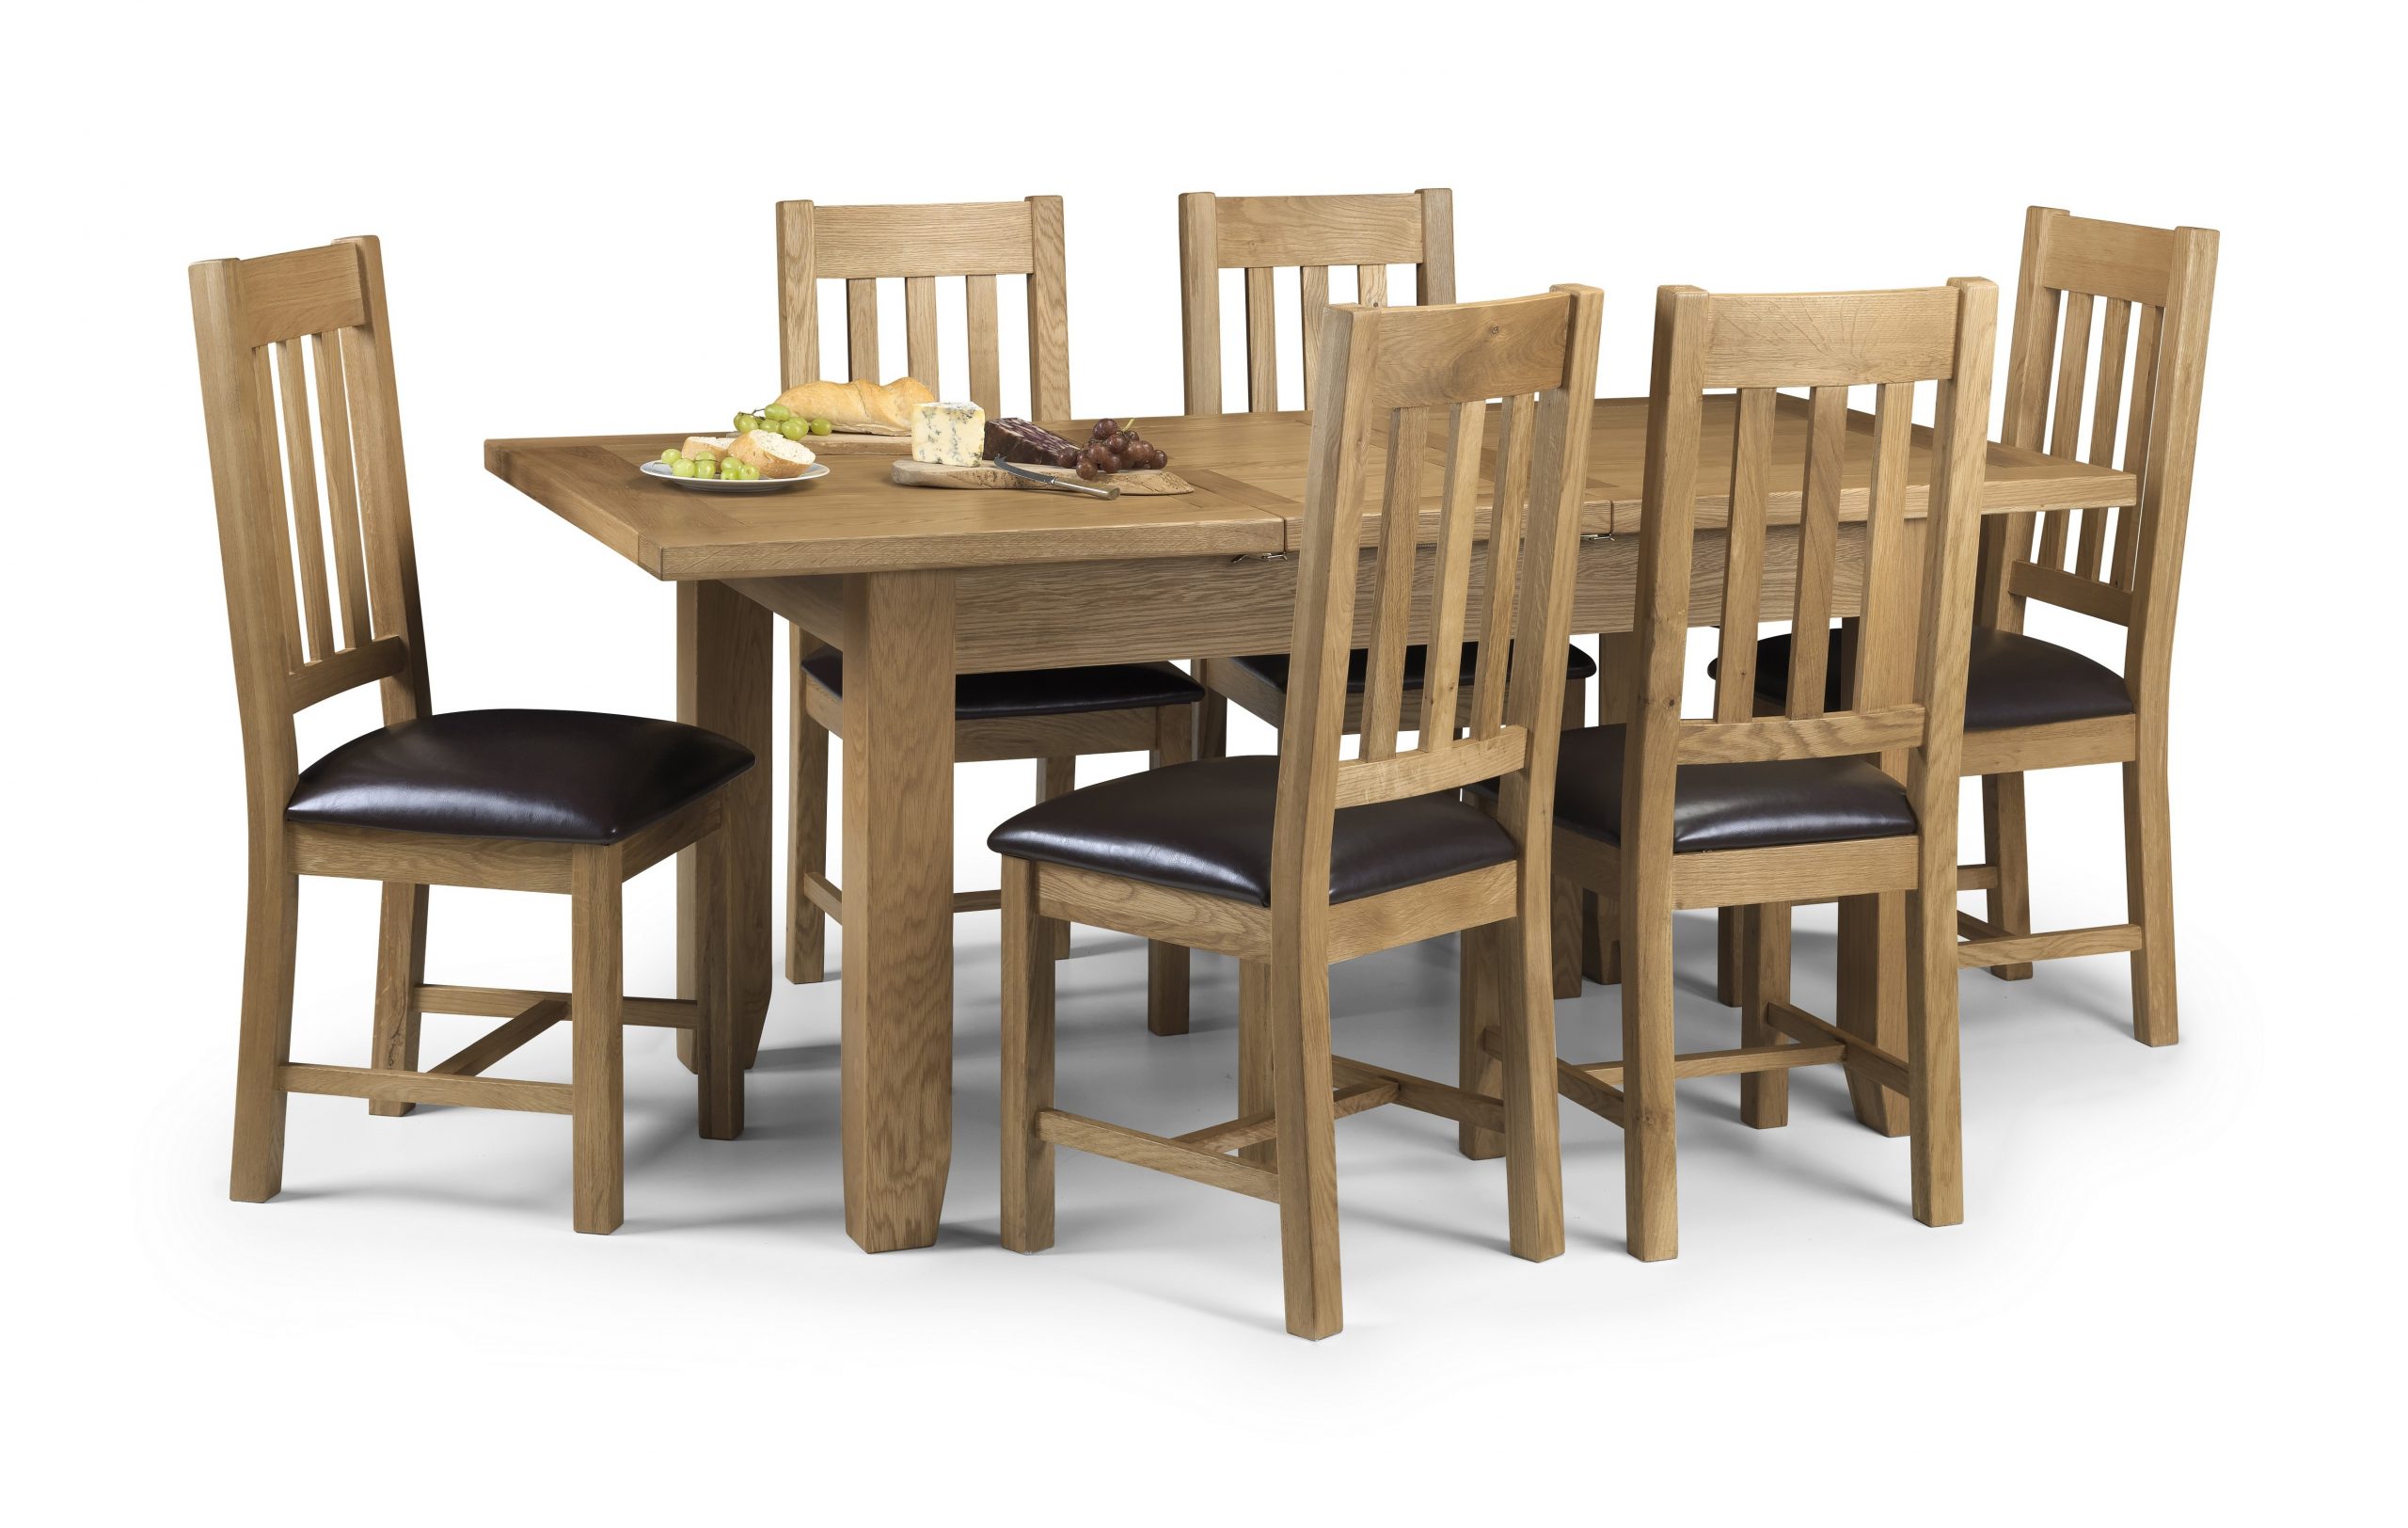 Astoria Extending Oak Dining Table intended for proportions 4878 X 3094